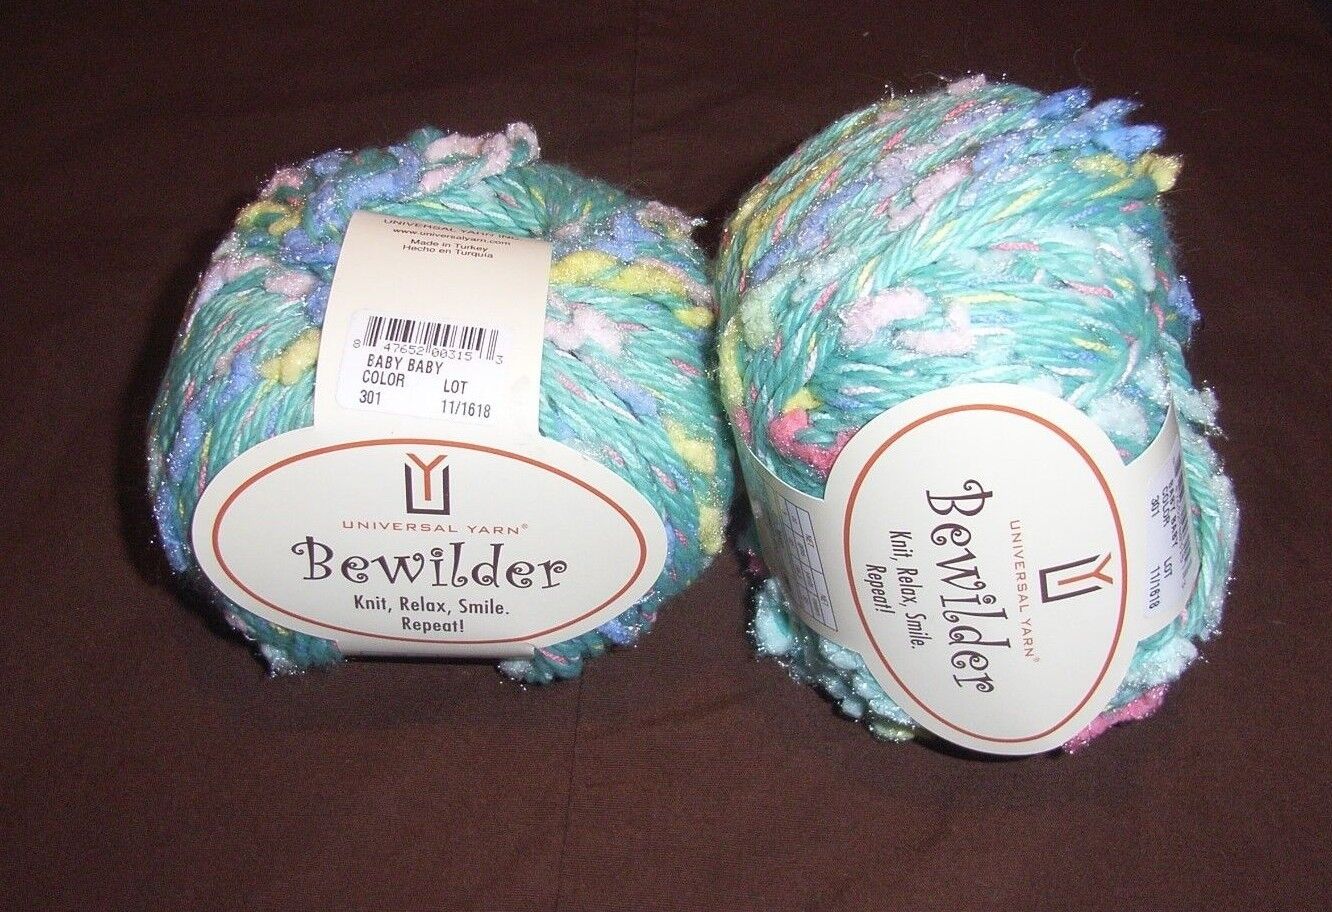 Lot of 2 Universal Yarns Bewilder Quality inspection Blue Max 74% OFF 6 Baby in Total oz